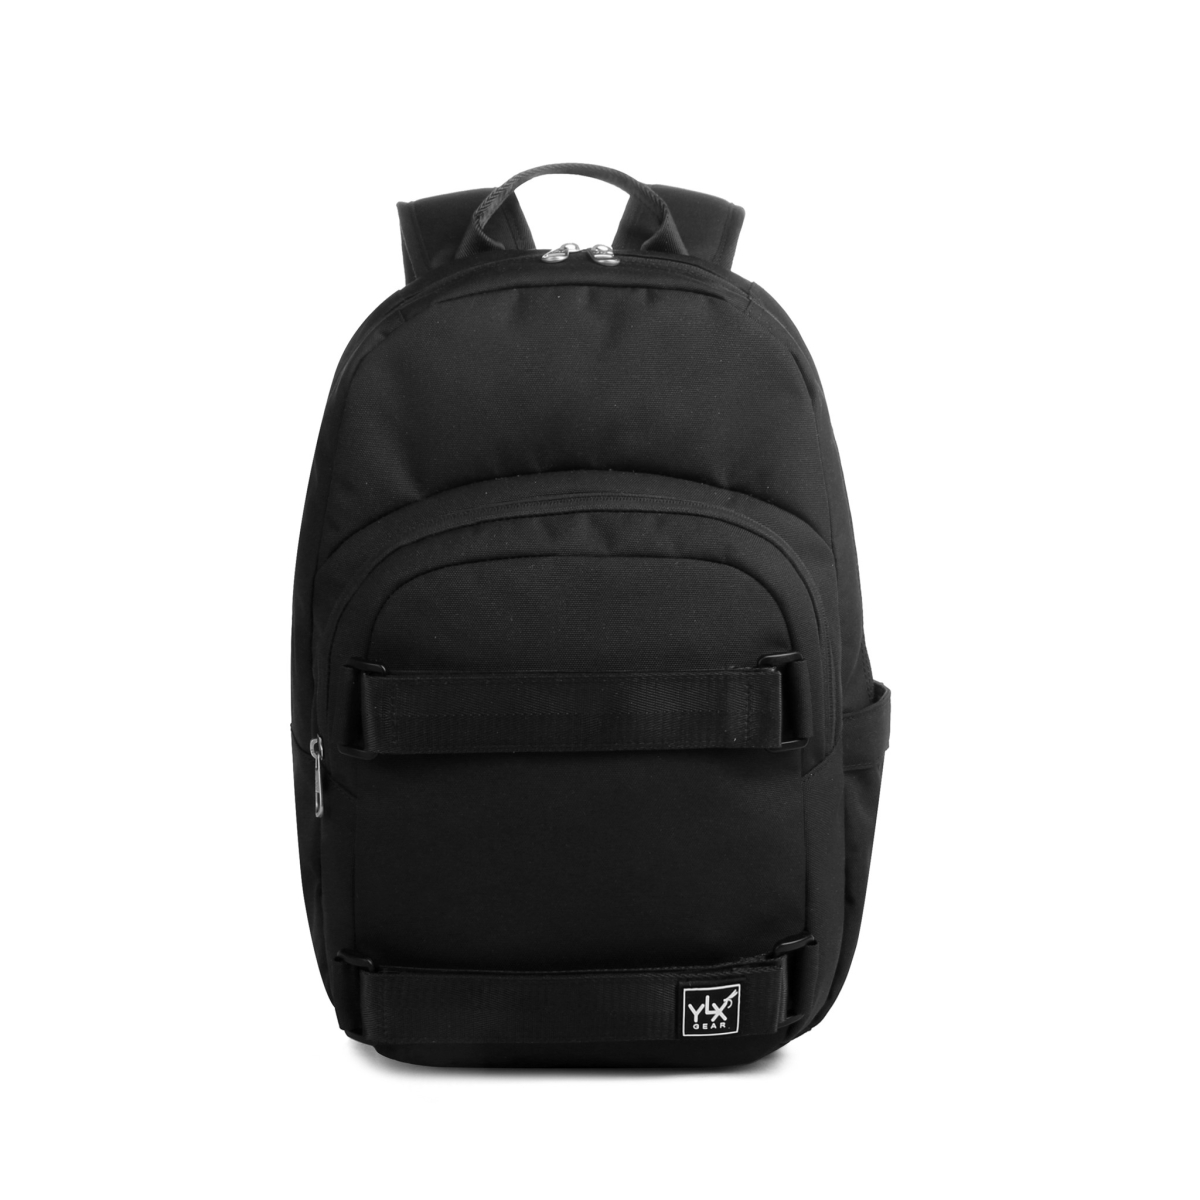 YLX Aster Backpack